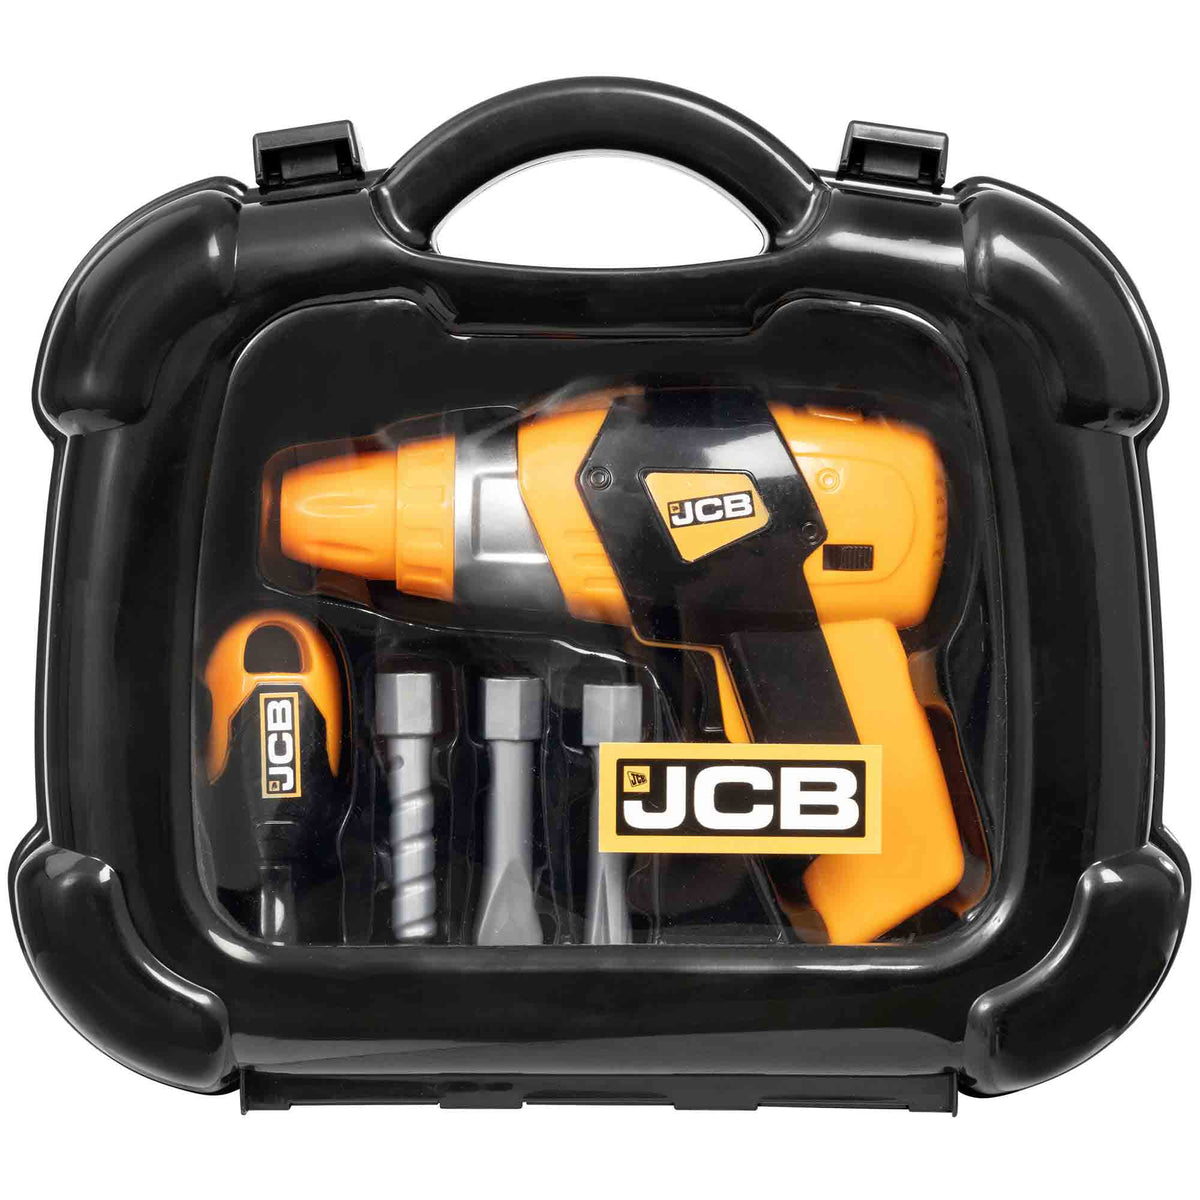 JCB Toy Drill with Case and Accessories - Battery Operated